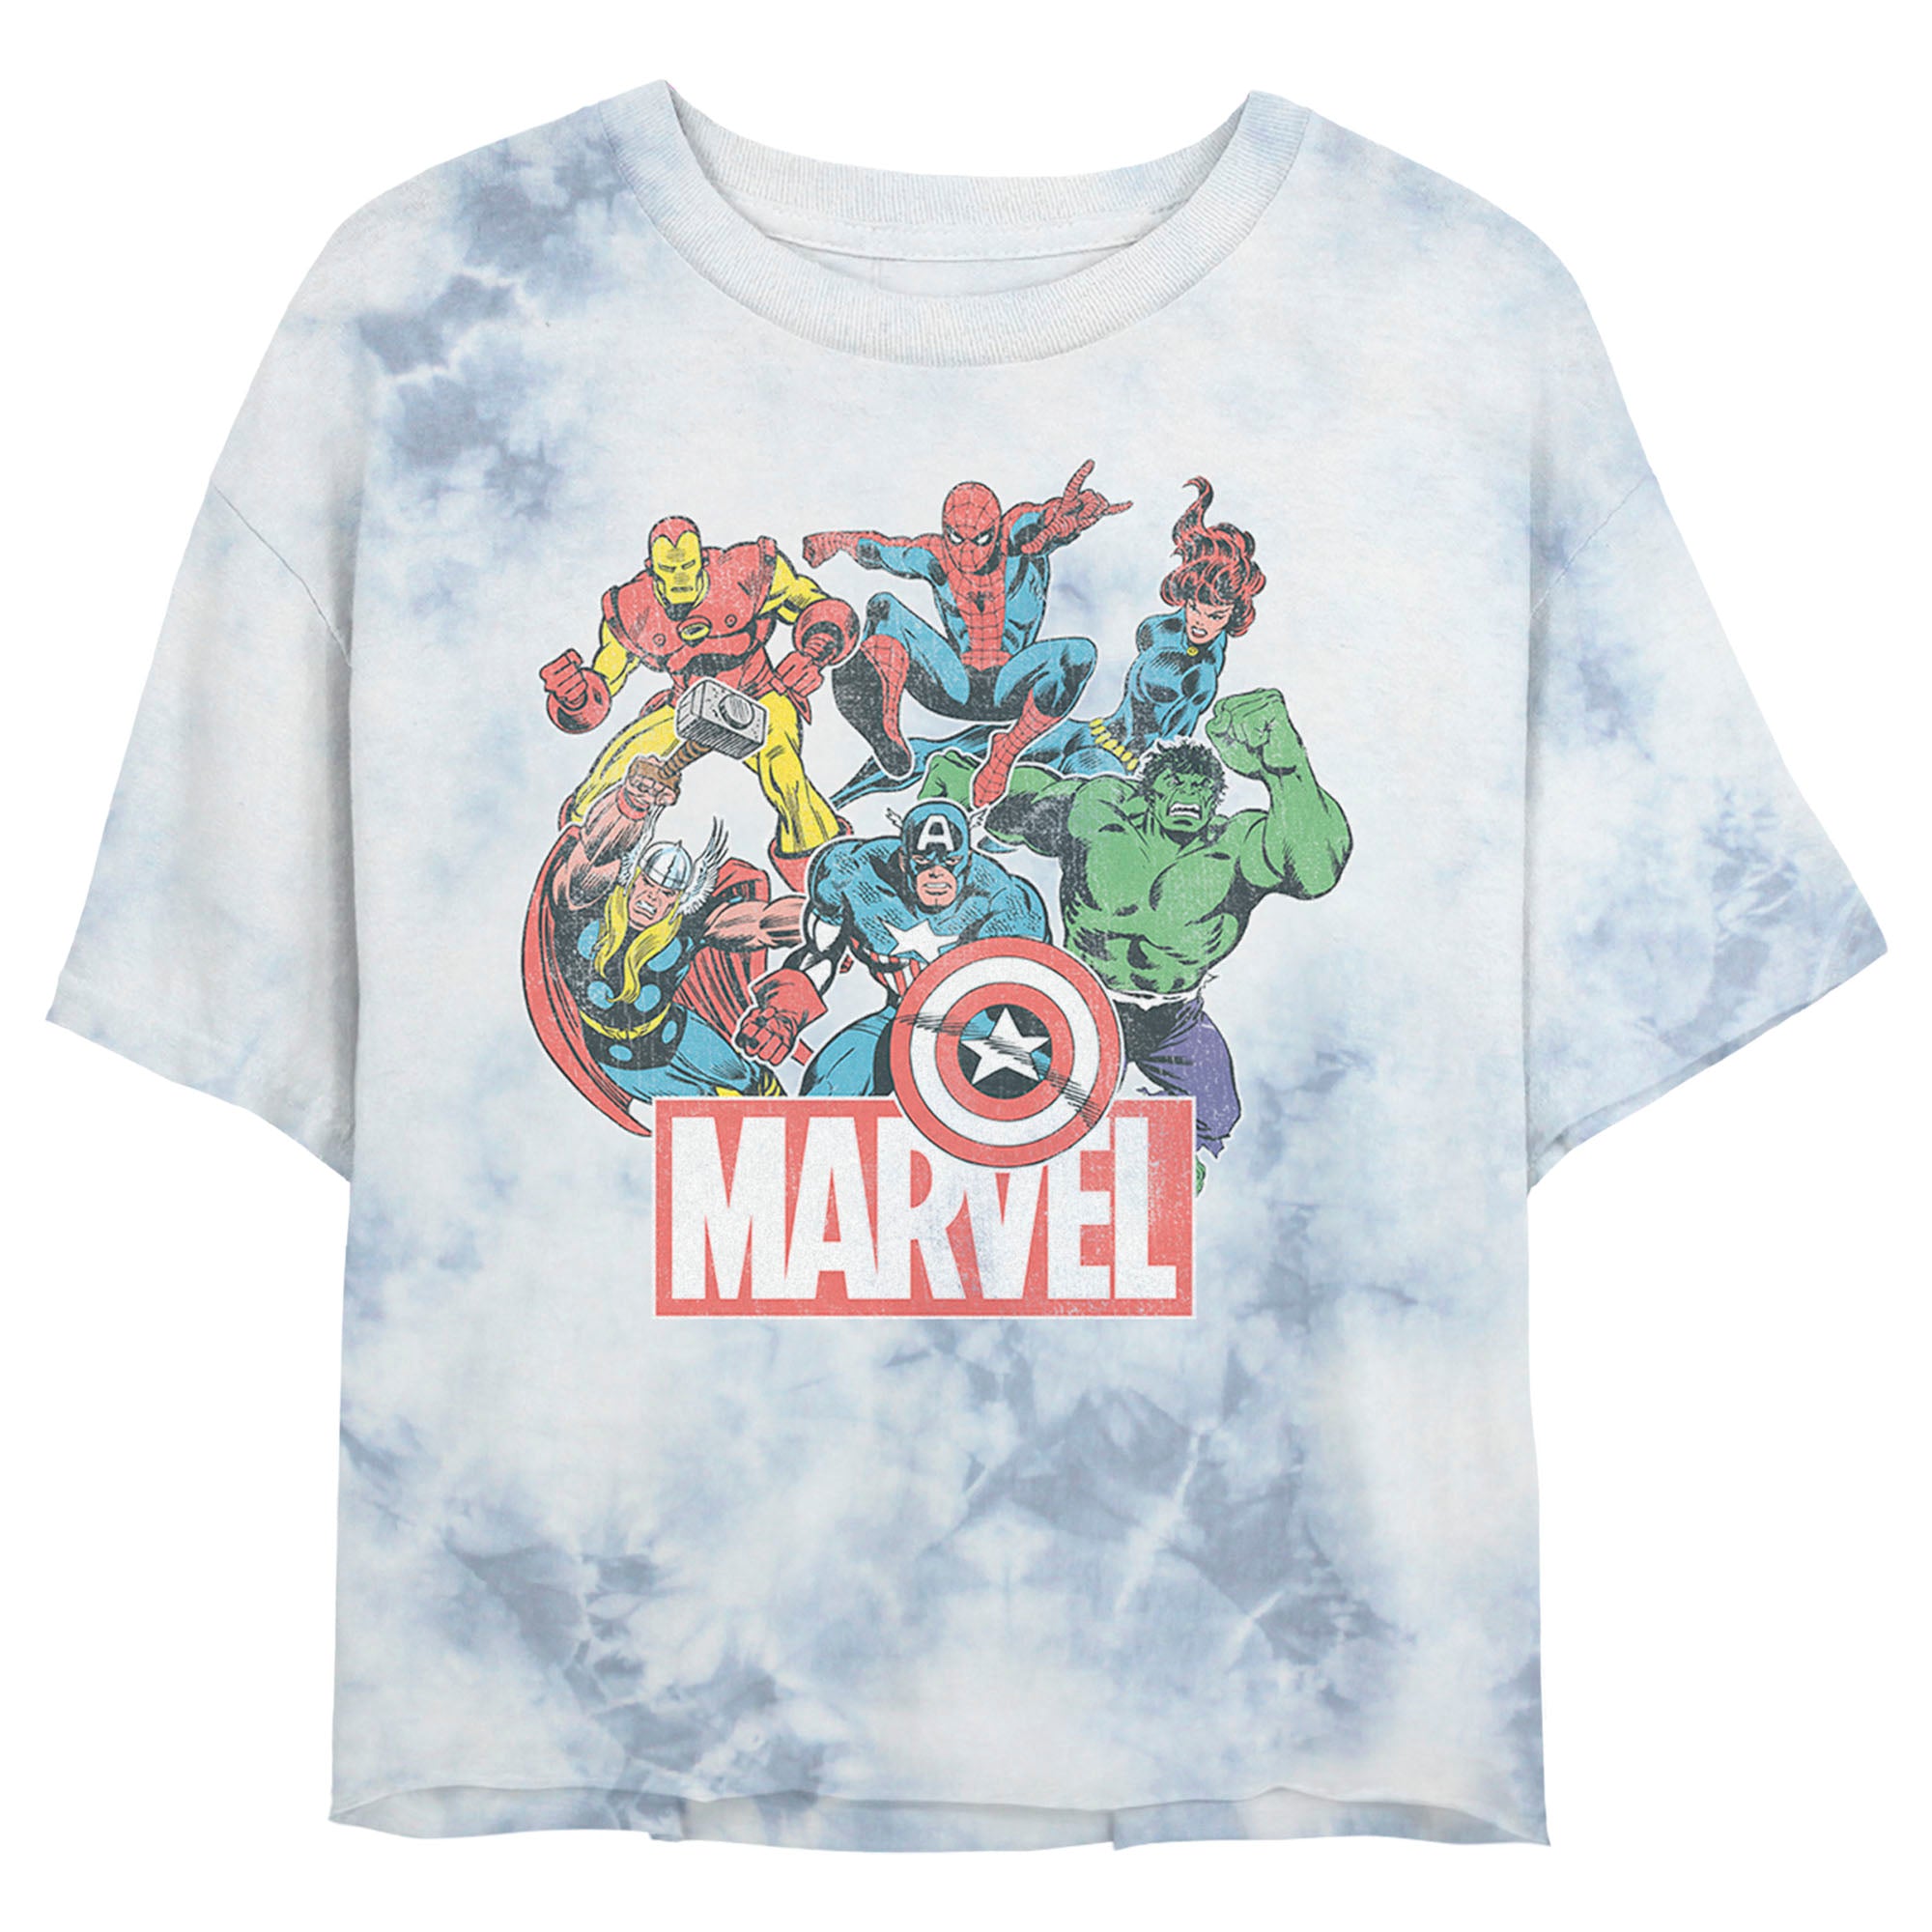 Join the Avengers: Shop Our Today Line Mouse Apparel Kids – Box The Merch Marvel